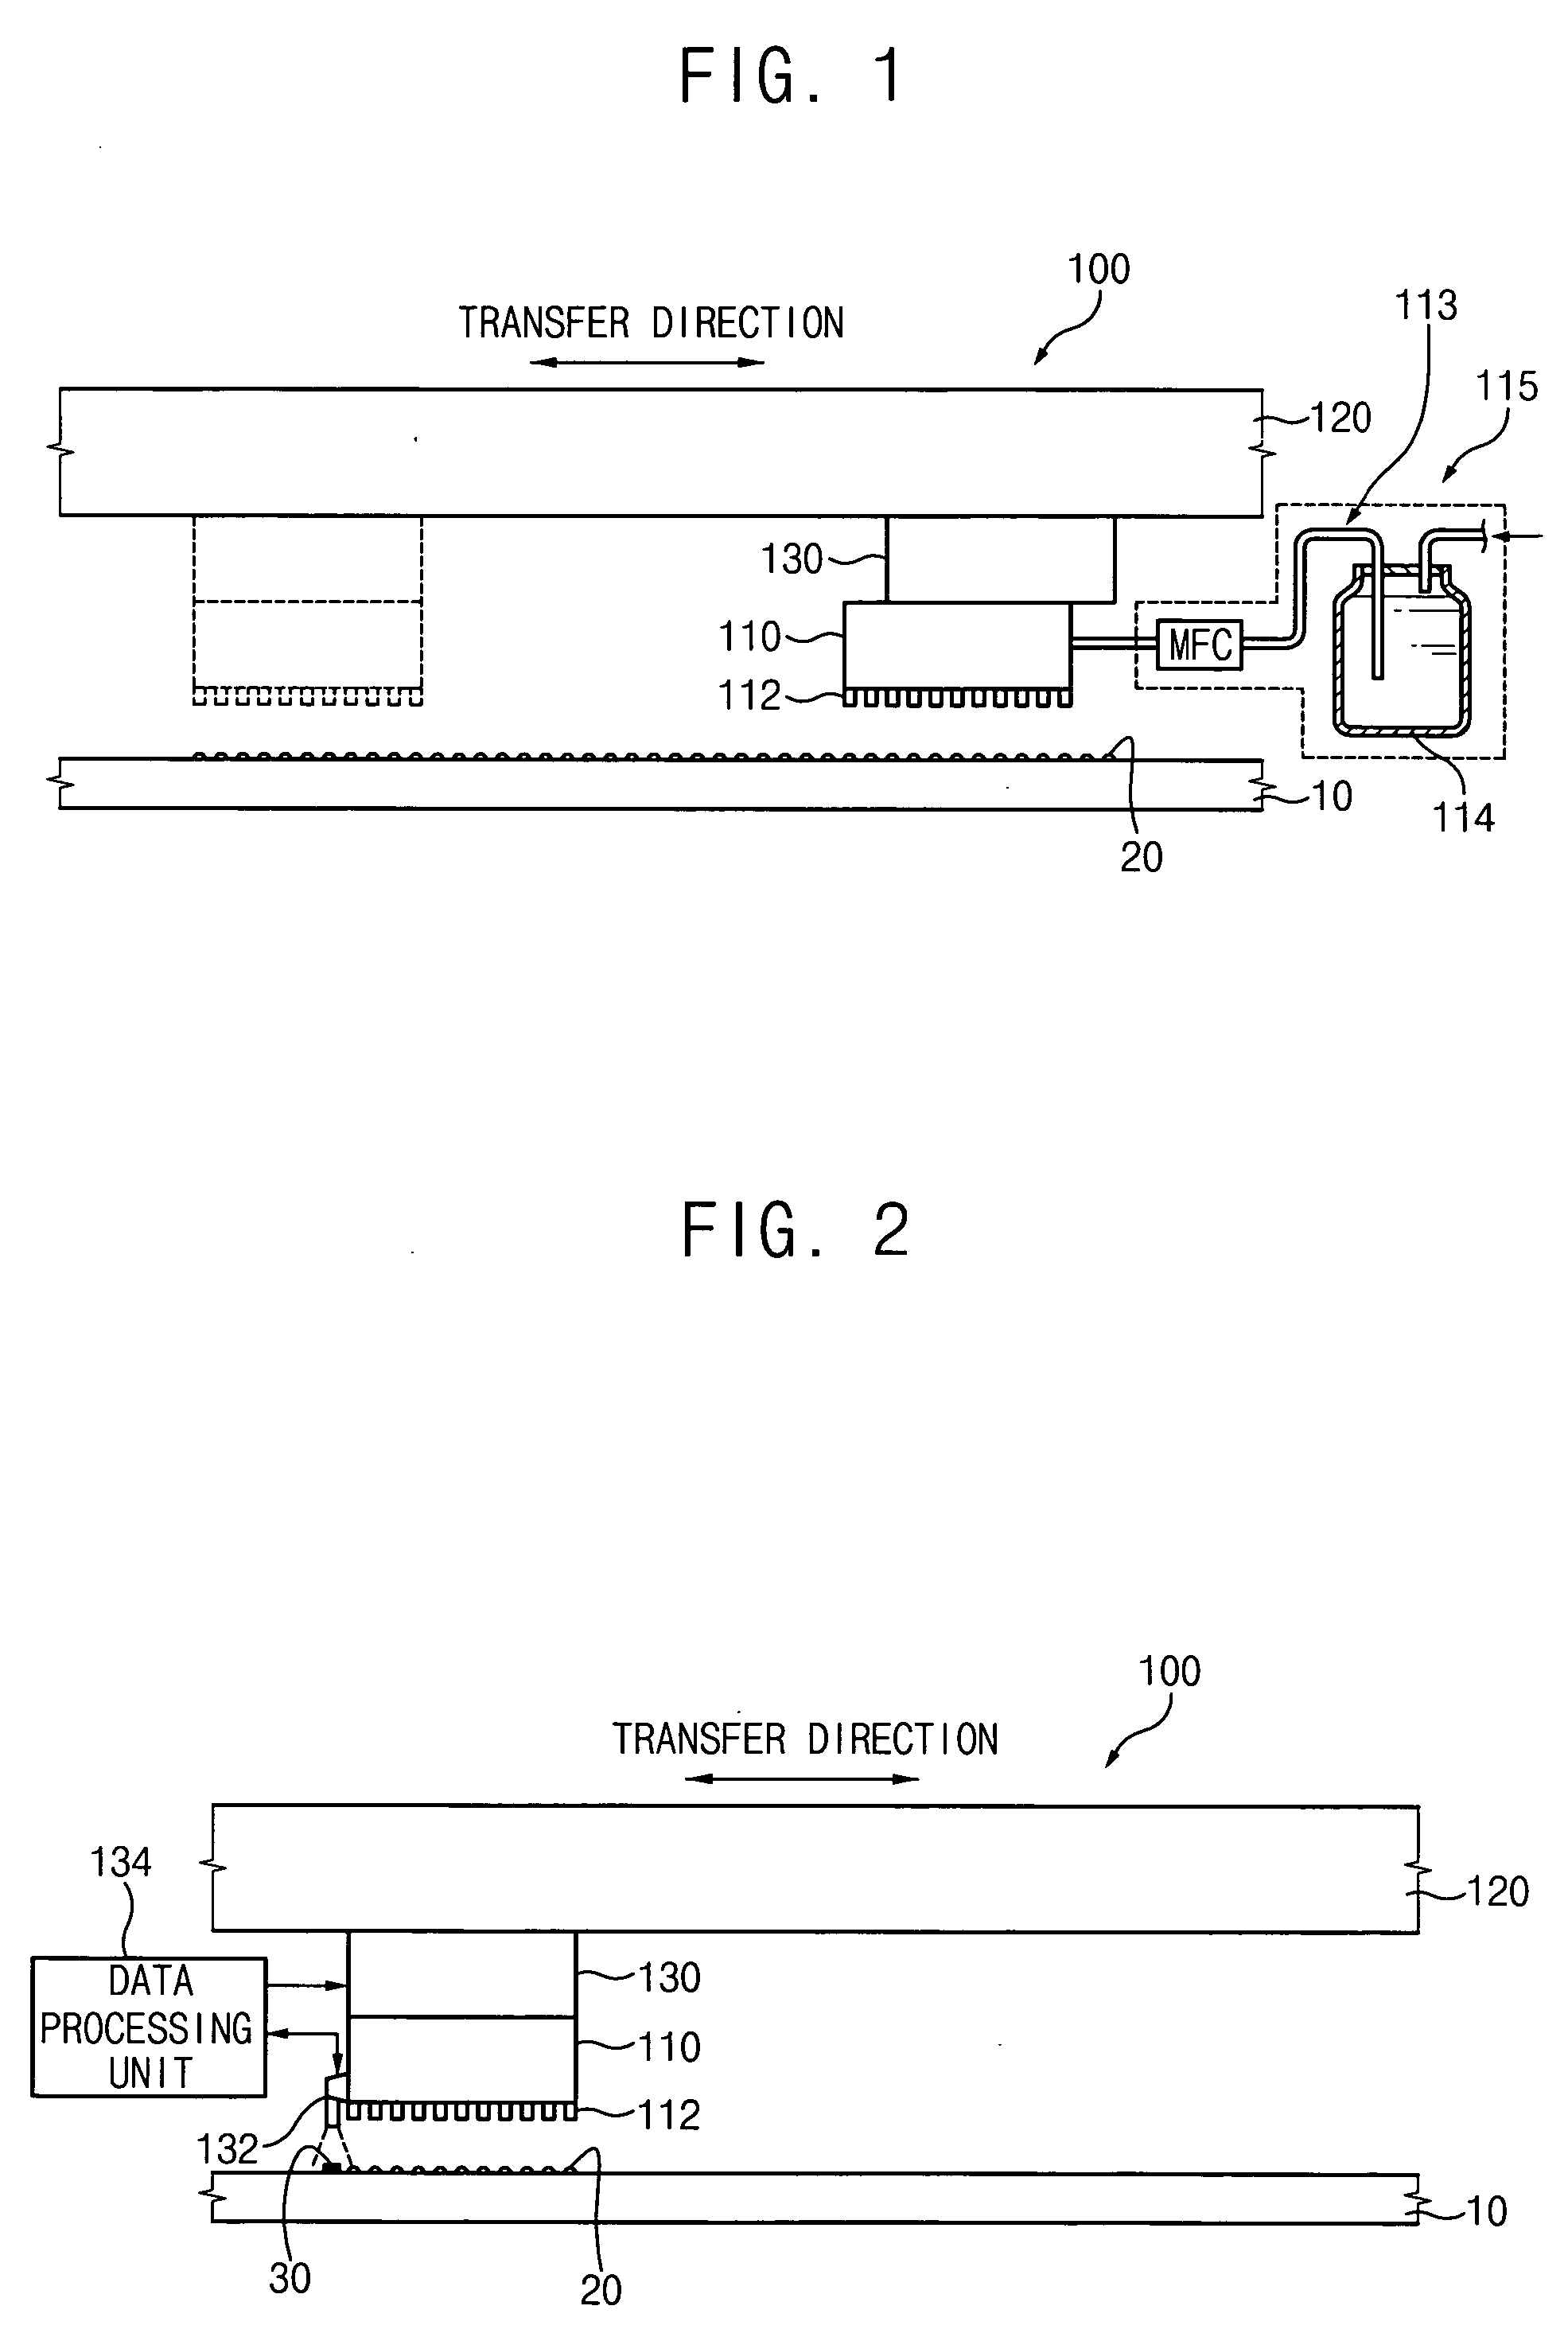 Apparatus for depositing an organic material on a substrate